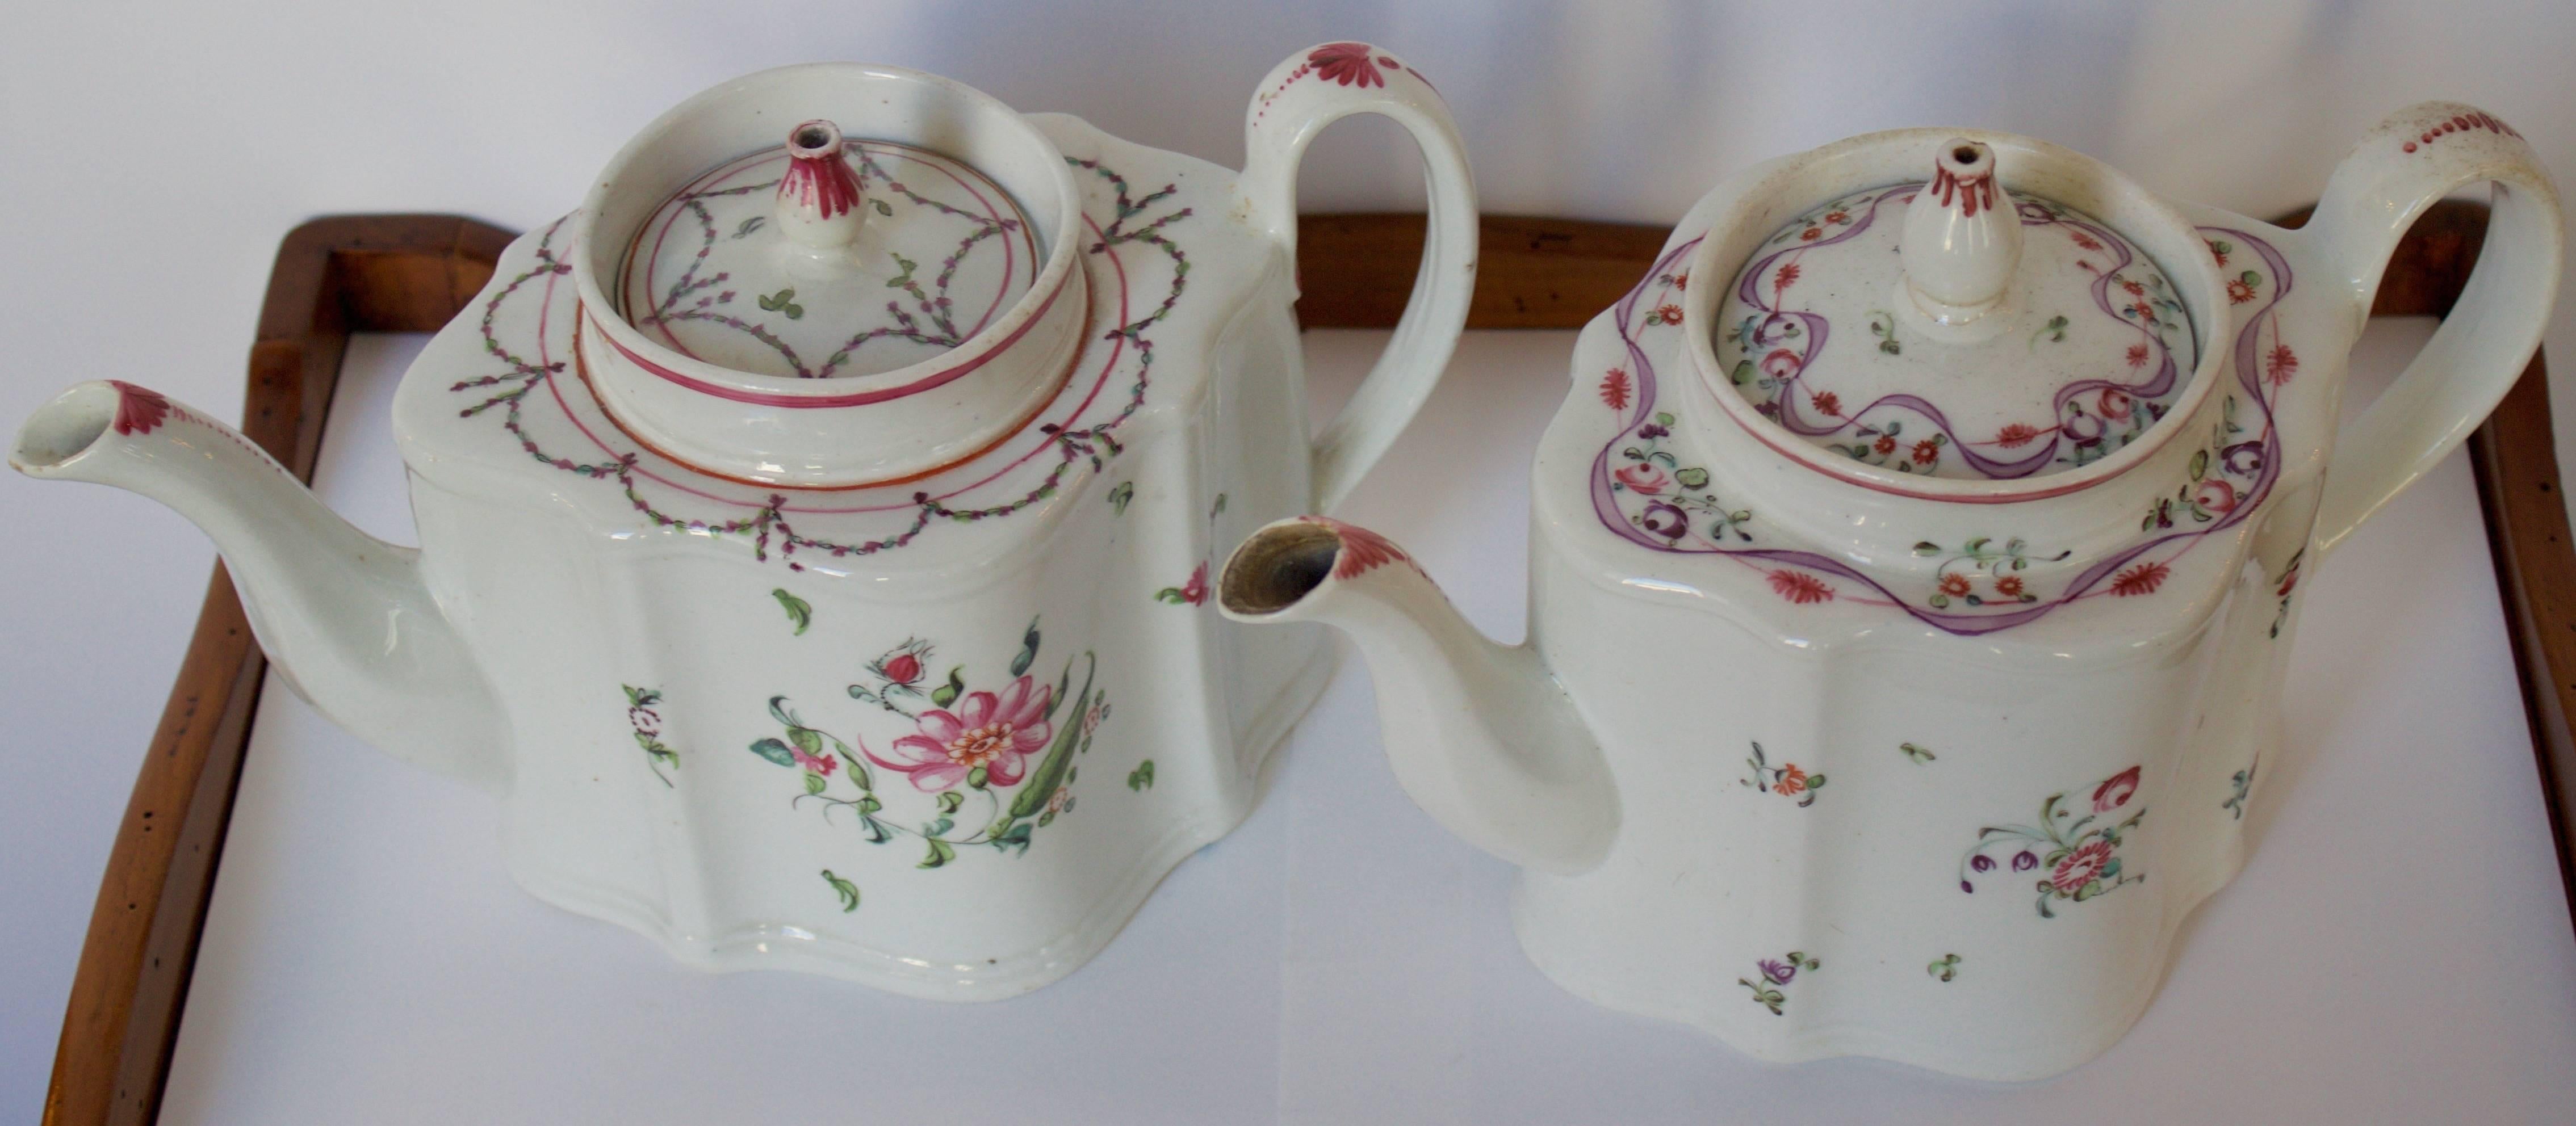 Lovely pair of antique 18th century. Teapots probably from Luneville. Handmade and painted with their lovely and delicate floral parers and venter tops. Perfect for a spring table.